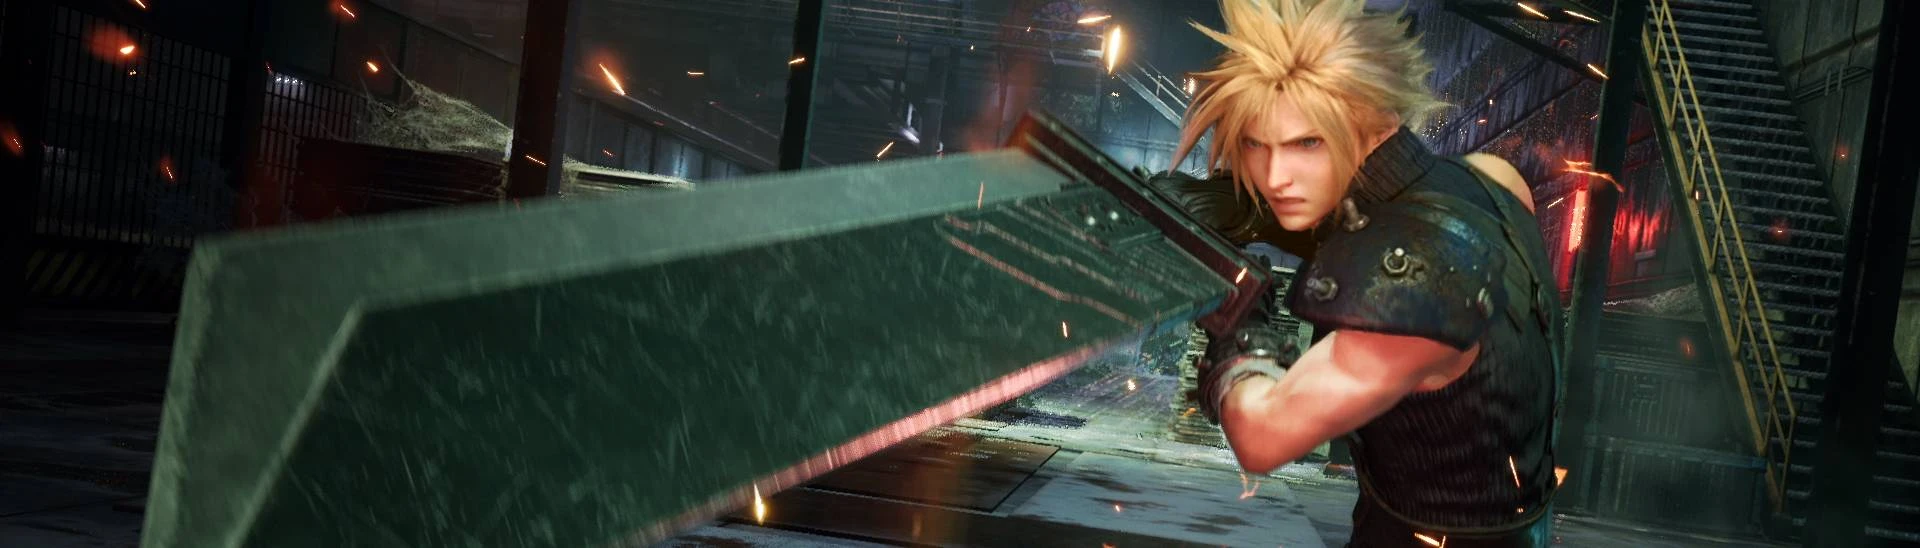 Final Fantasy VII Remake New Mods Allow to Level Up Past Lv.50